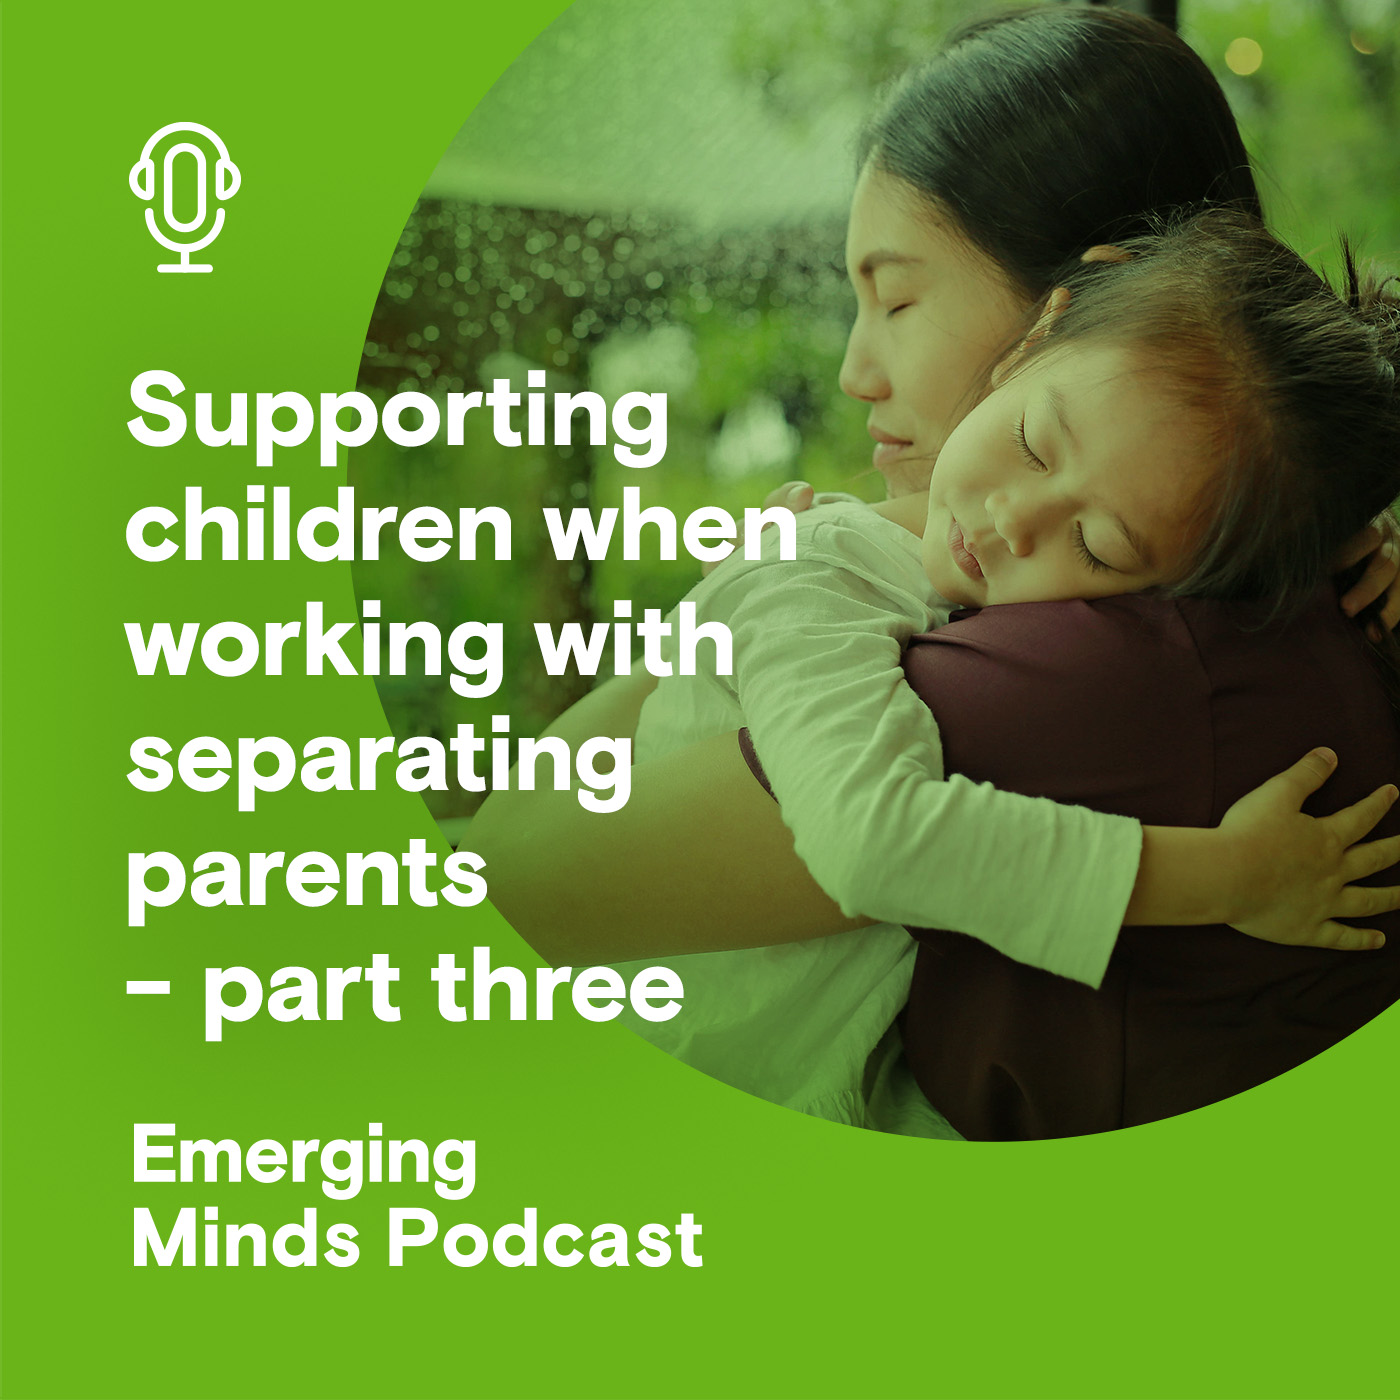 Supporting children when working with separating parents - part three